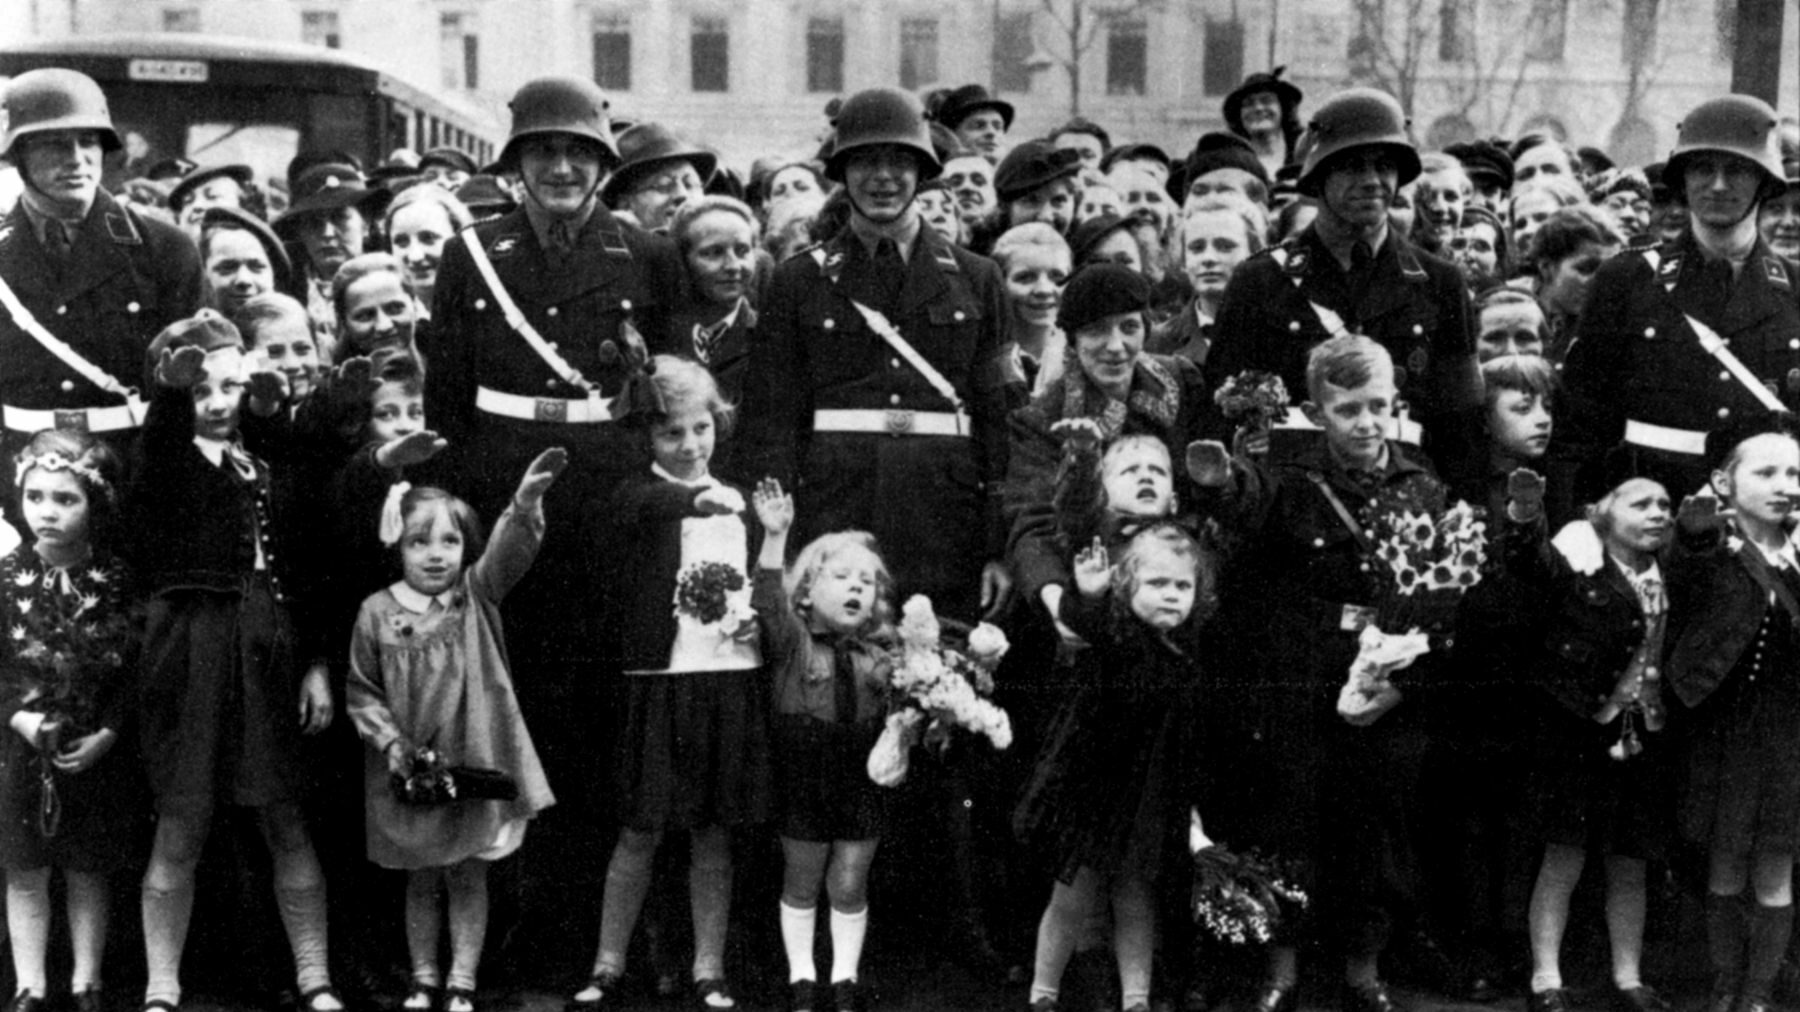 A throng of mesmerized children attempts to squeeze between smiling SS guards to deliver the Nazi salute during a party rally. Children were intensely indoctrinated in the Third Reich and made to practice the salute along with a “Heil Hitler!” to increase their devotion to the regime.